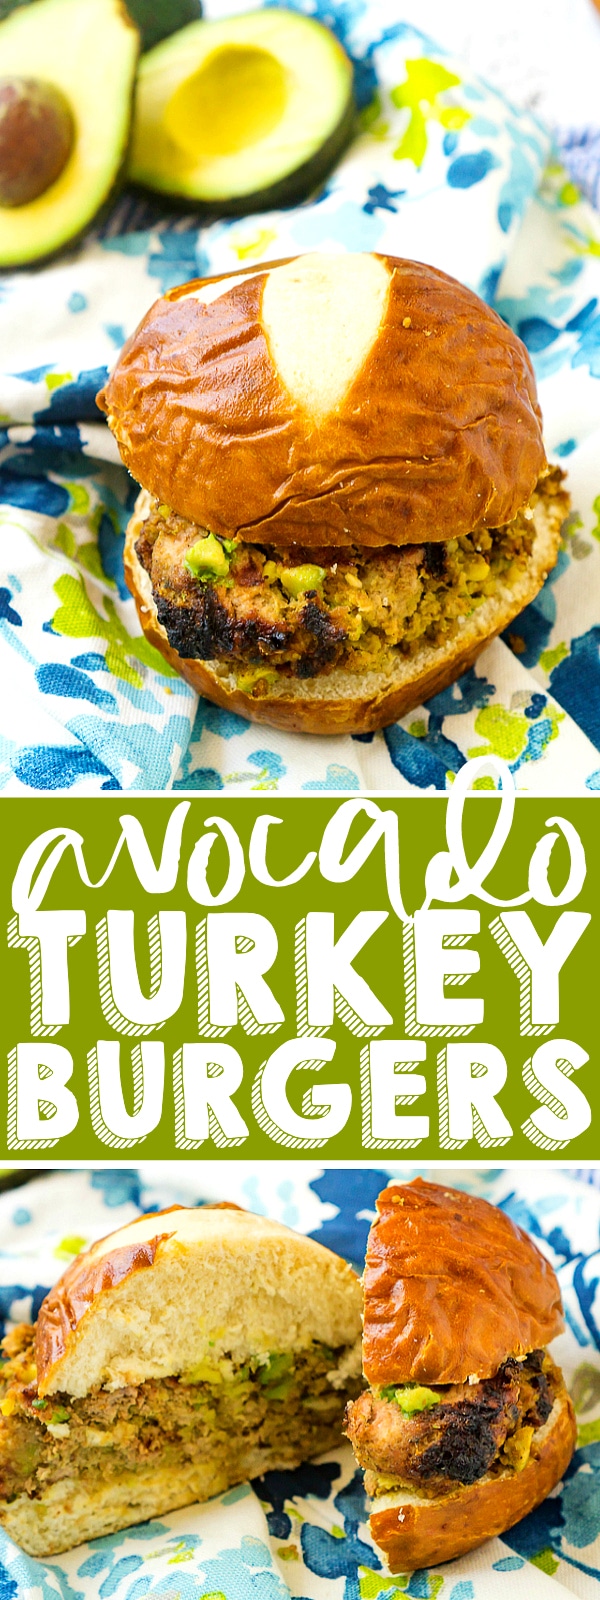 Your new favorite summer burger!!! Avocado Turkey Burgers are a light summer burger recipe that everyone will love! Switch out your normal burgers on the grill with a healthier bbq option filled with fresh avocado. | THE LOVE NERDS #grillrecipe #avocadorecipe #healthierburger